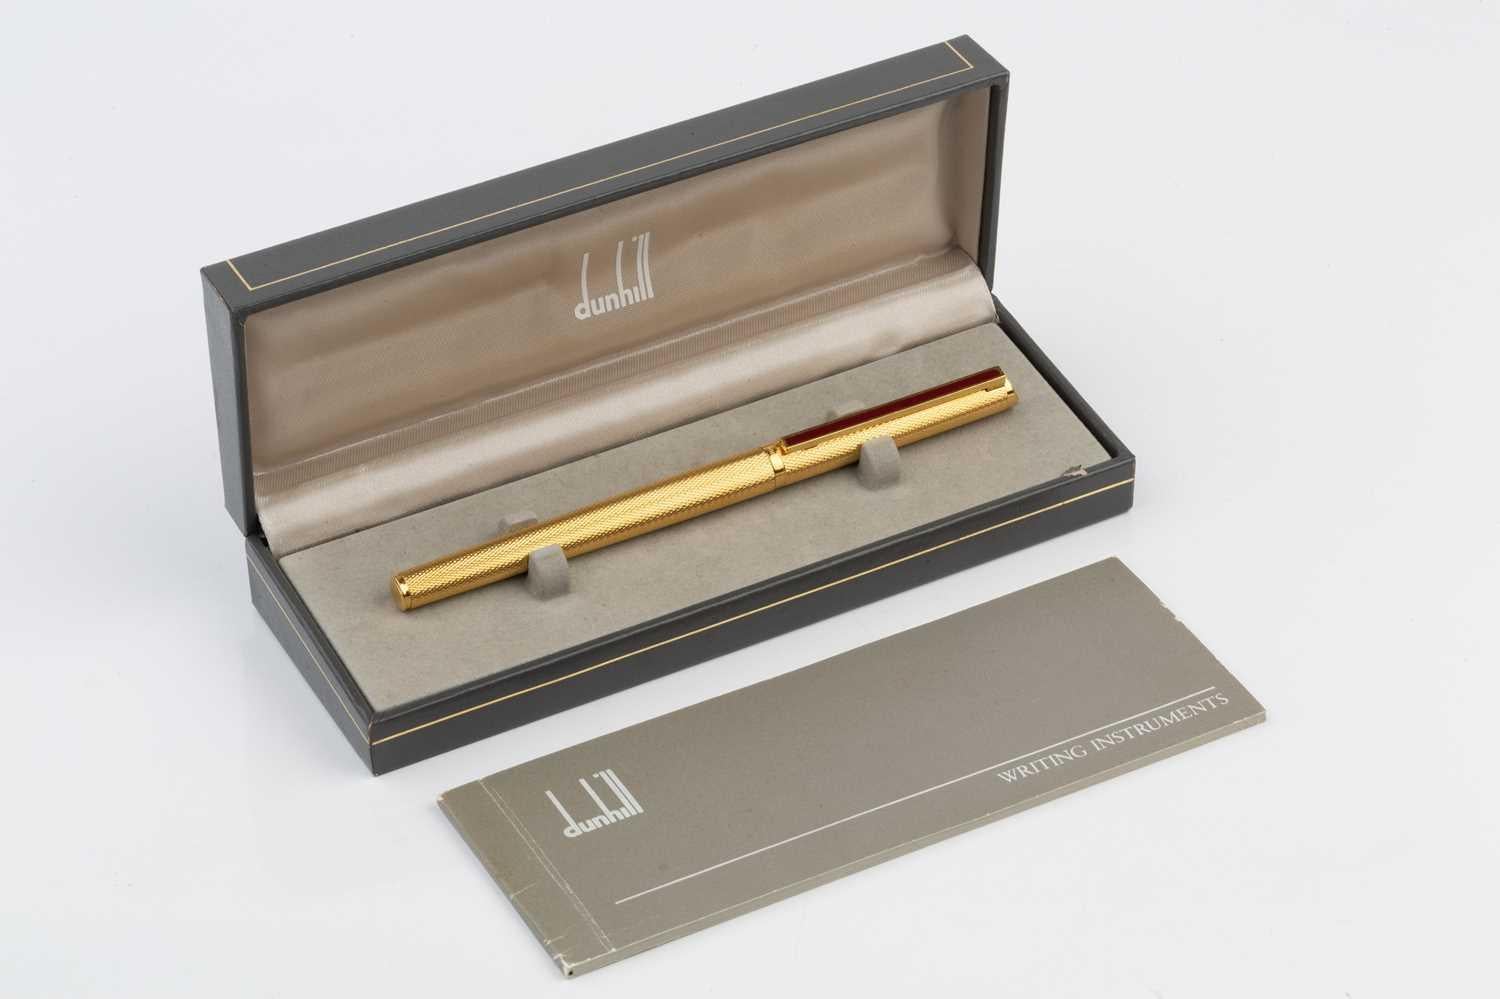 Dunhill Gemline 14k Gold Plated Fountain Pen With An Engine Turned Decoration With Enamel Inset Clip With Original Dunhill Box With Outer Cardboard Sleeve

